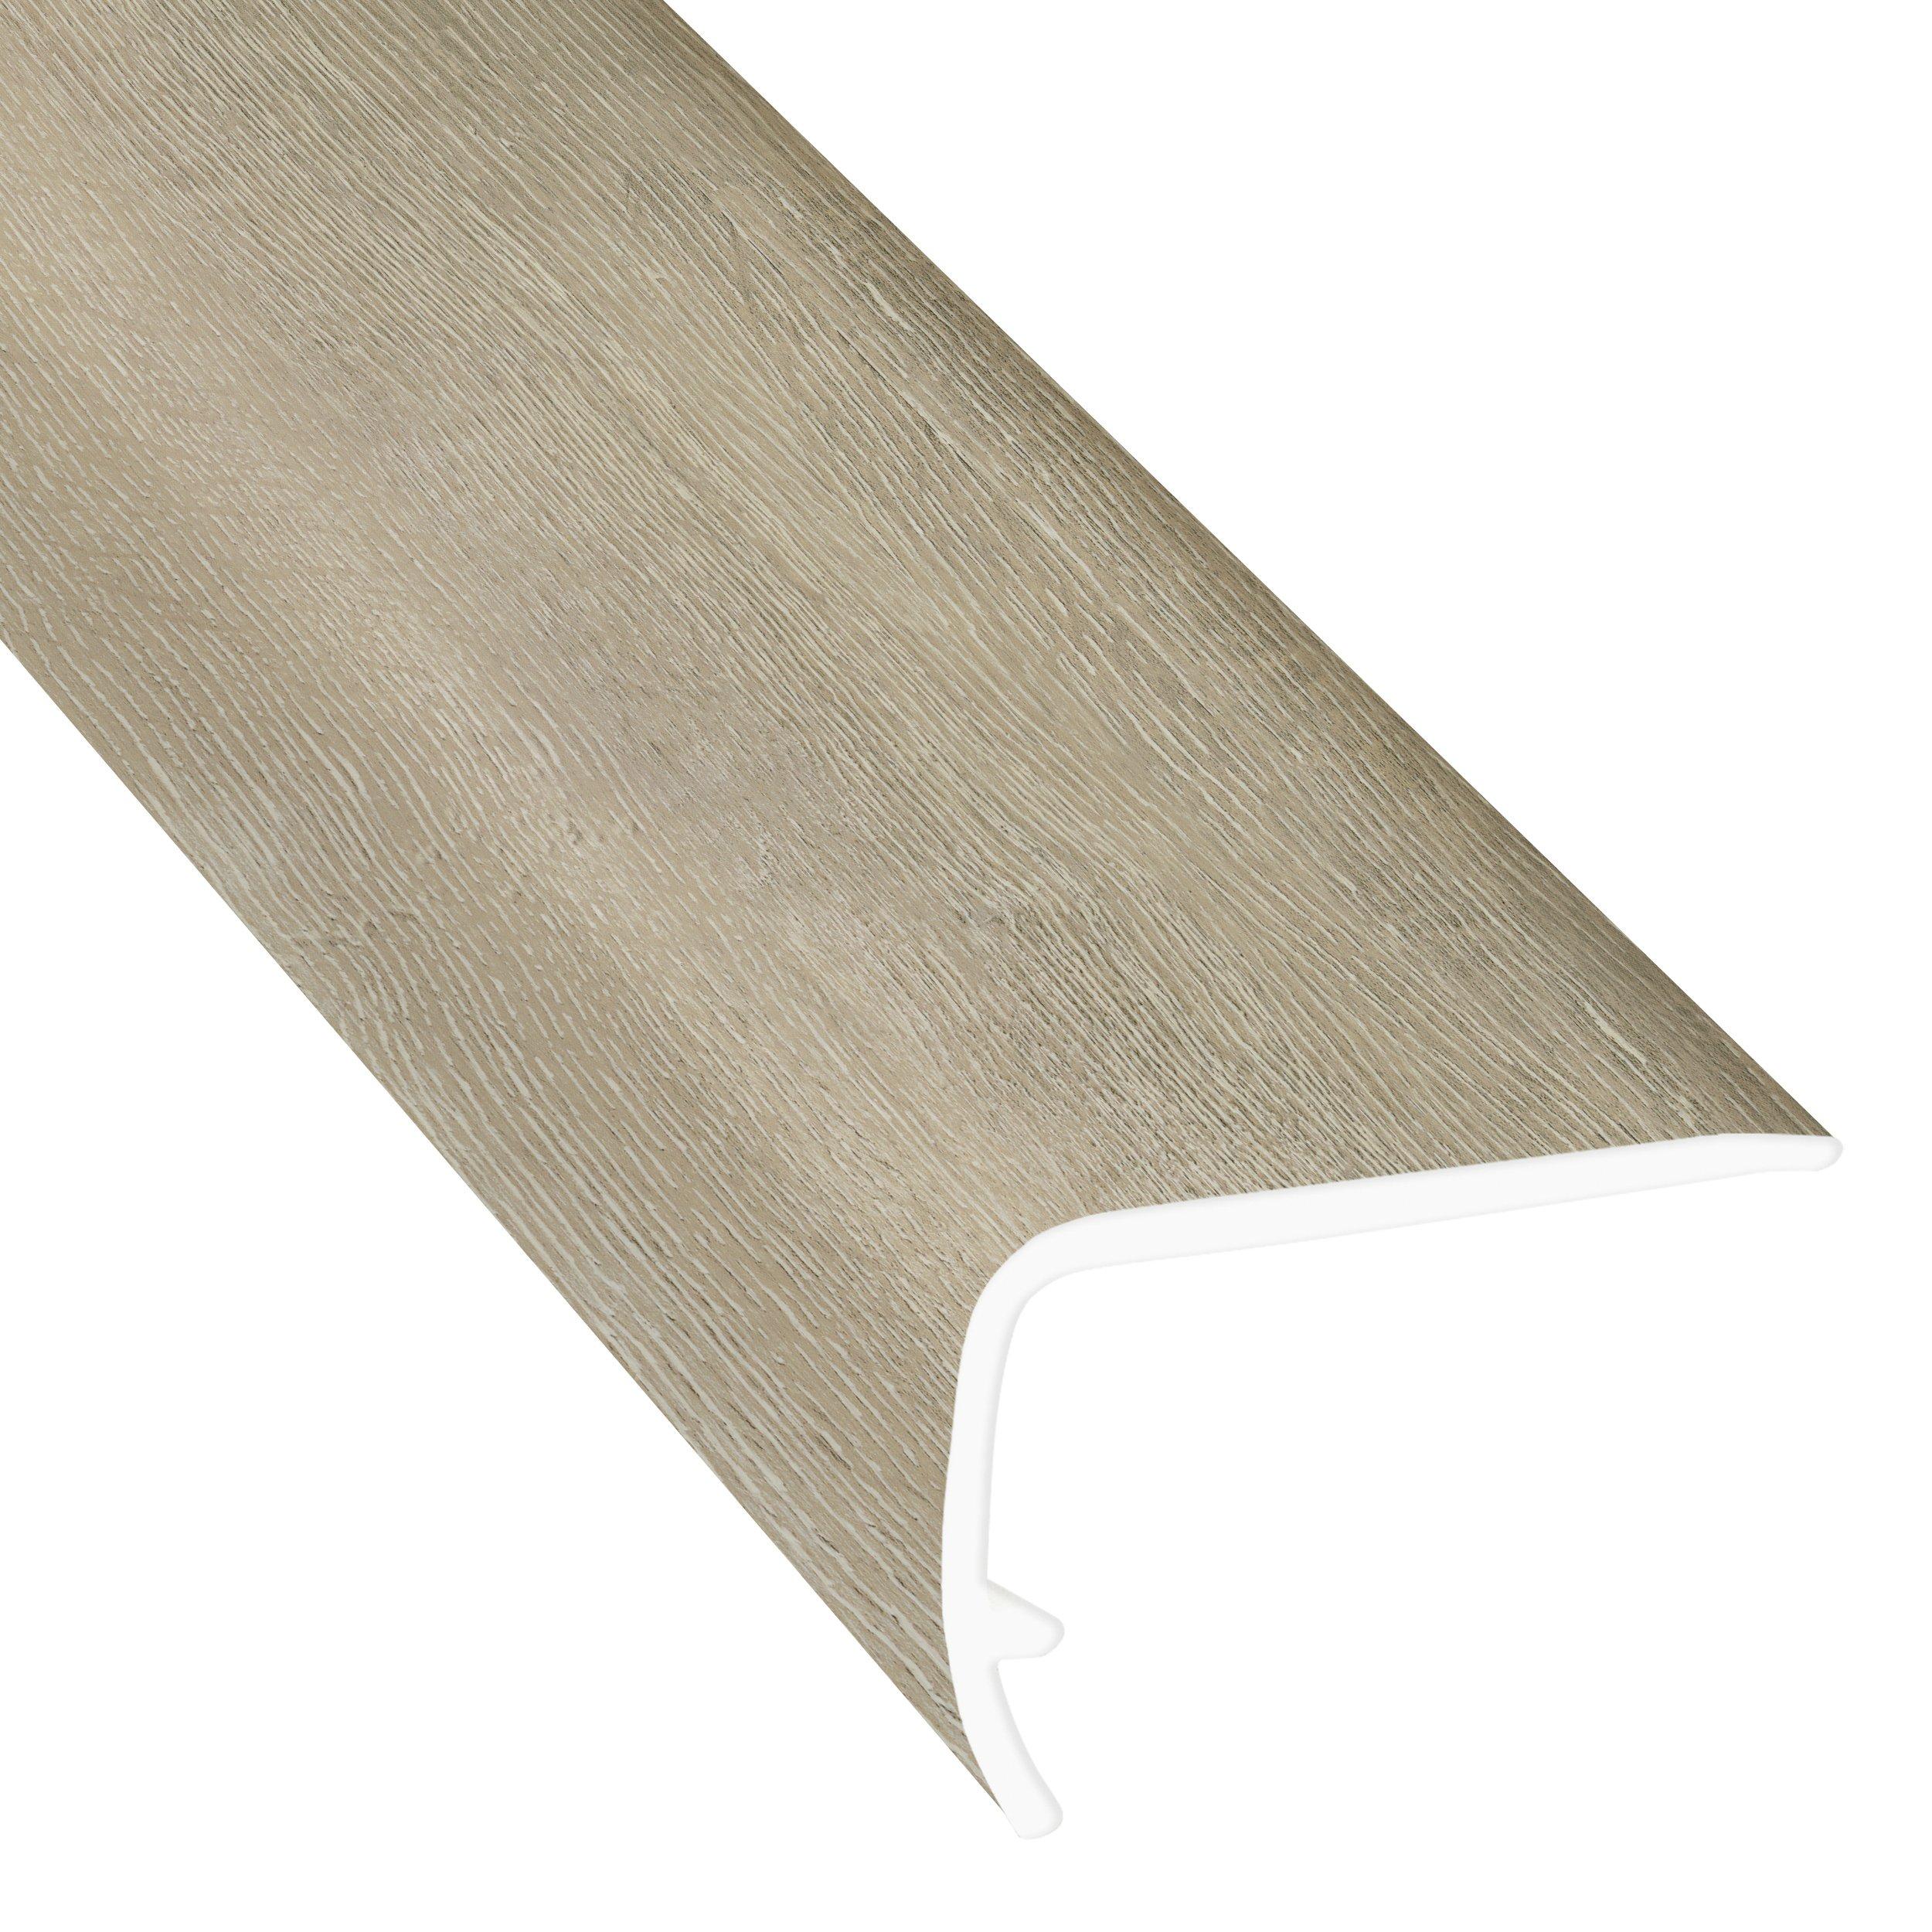 Sand Beige 94in. Vinyl Overlapping Stair Nose